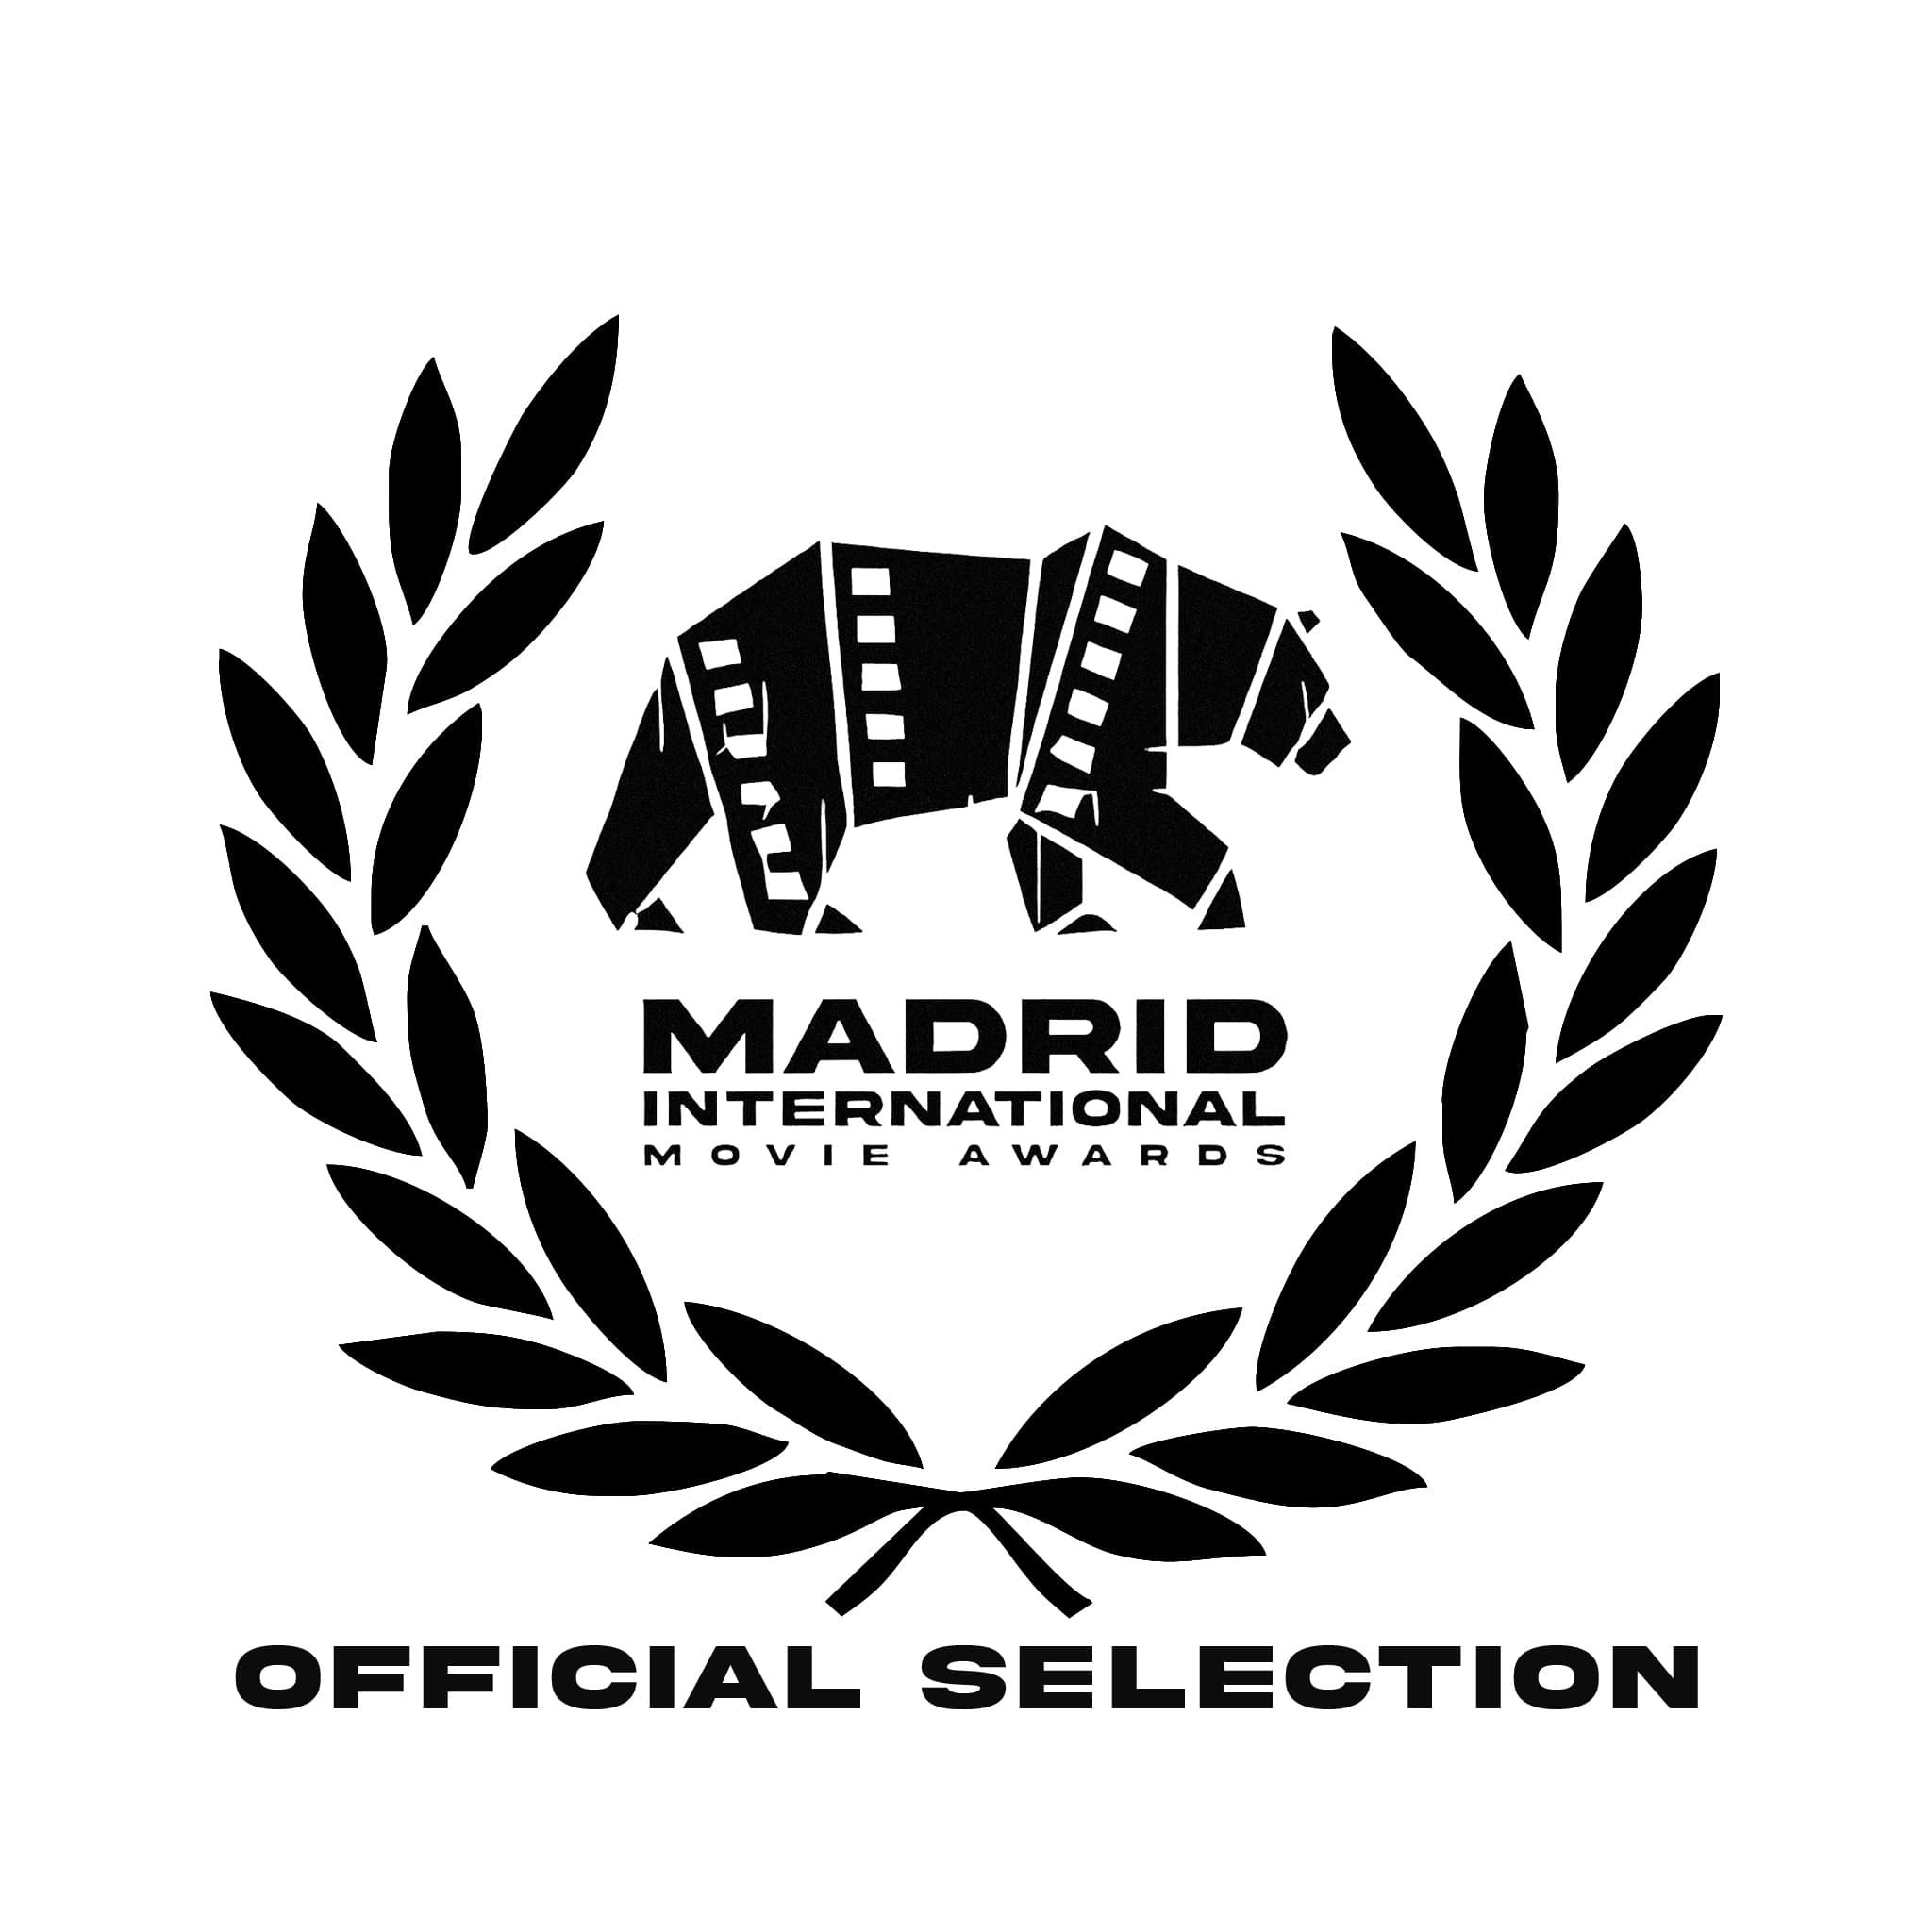 Island Dreams got an Official Selection at the Madrid International Movie Festival and is a Semi-Finalist for the New York International Woman&rsquo;s Festial in NYC&hellip;. thank you for acknowledging Island Dreams!! Hiy!! #officialselection #IMDb 